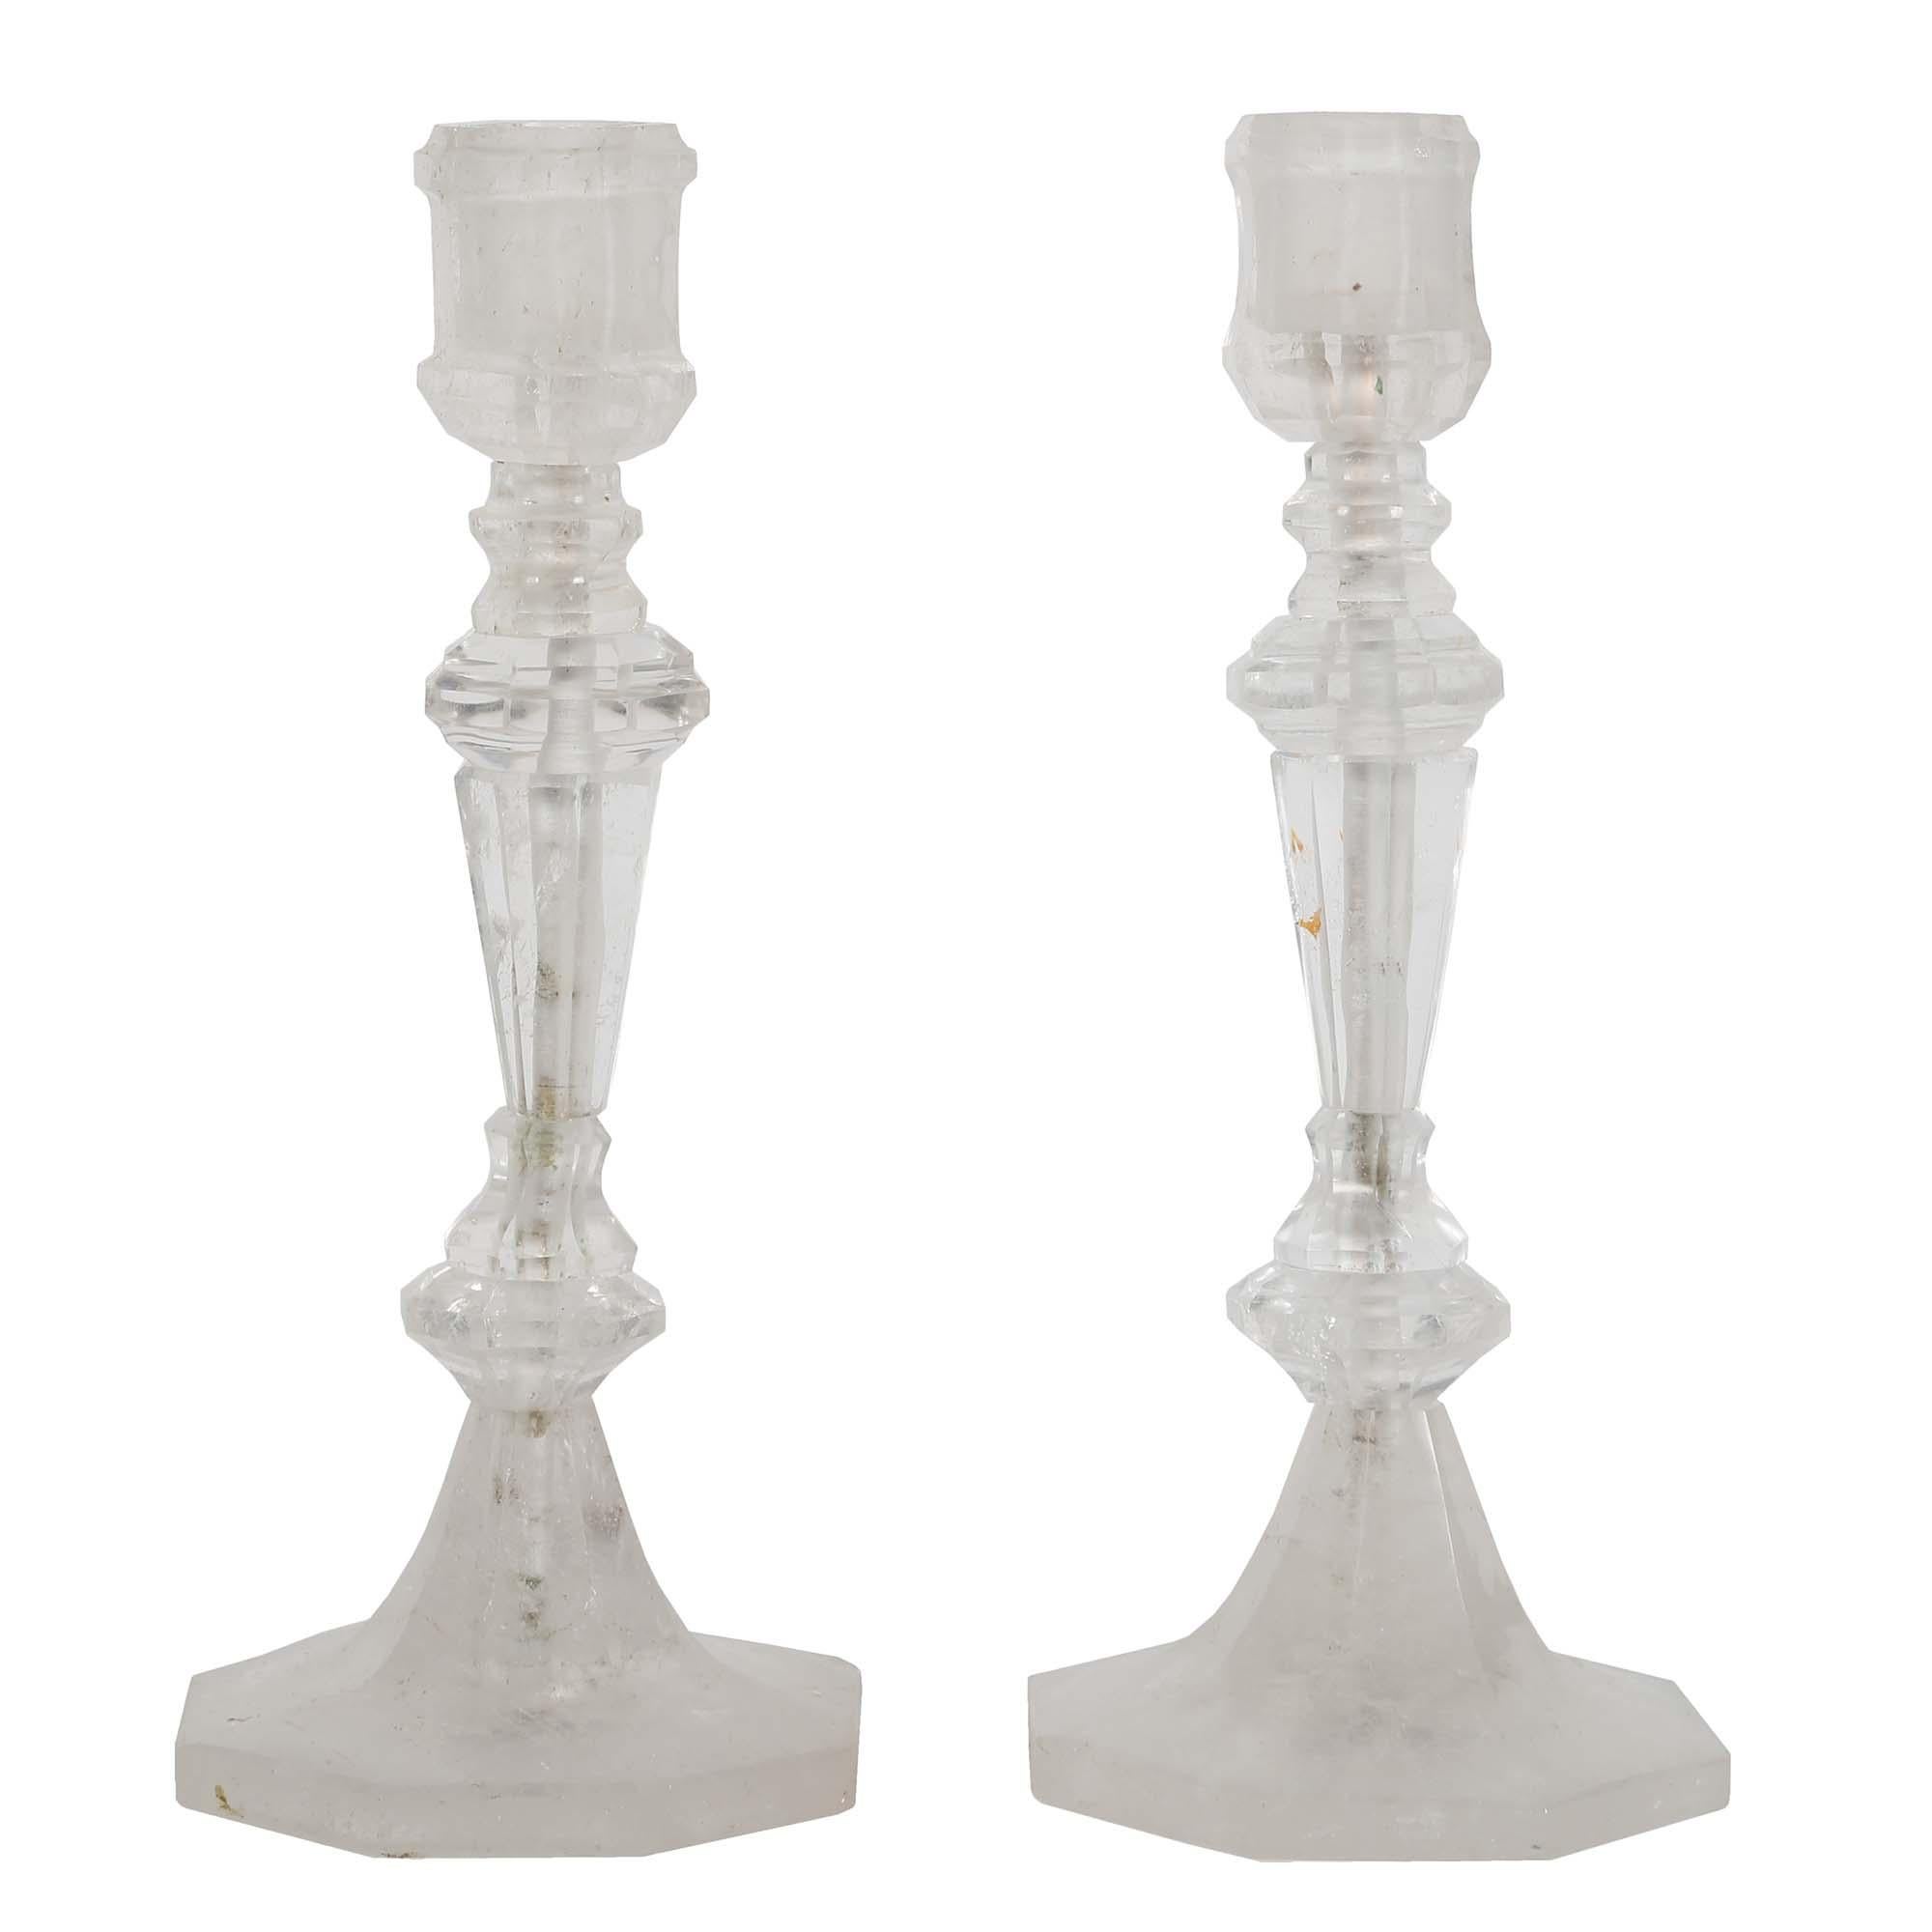 A wonderful pair of French Louis XVI style rock crystal candlesticks. Each unique rock crystal candlestick is raised by an octagonal base tapering up to the finely cut central fut and candle cup.